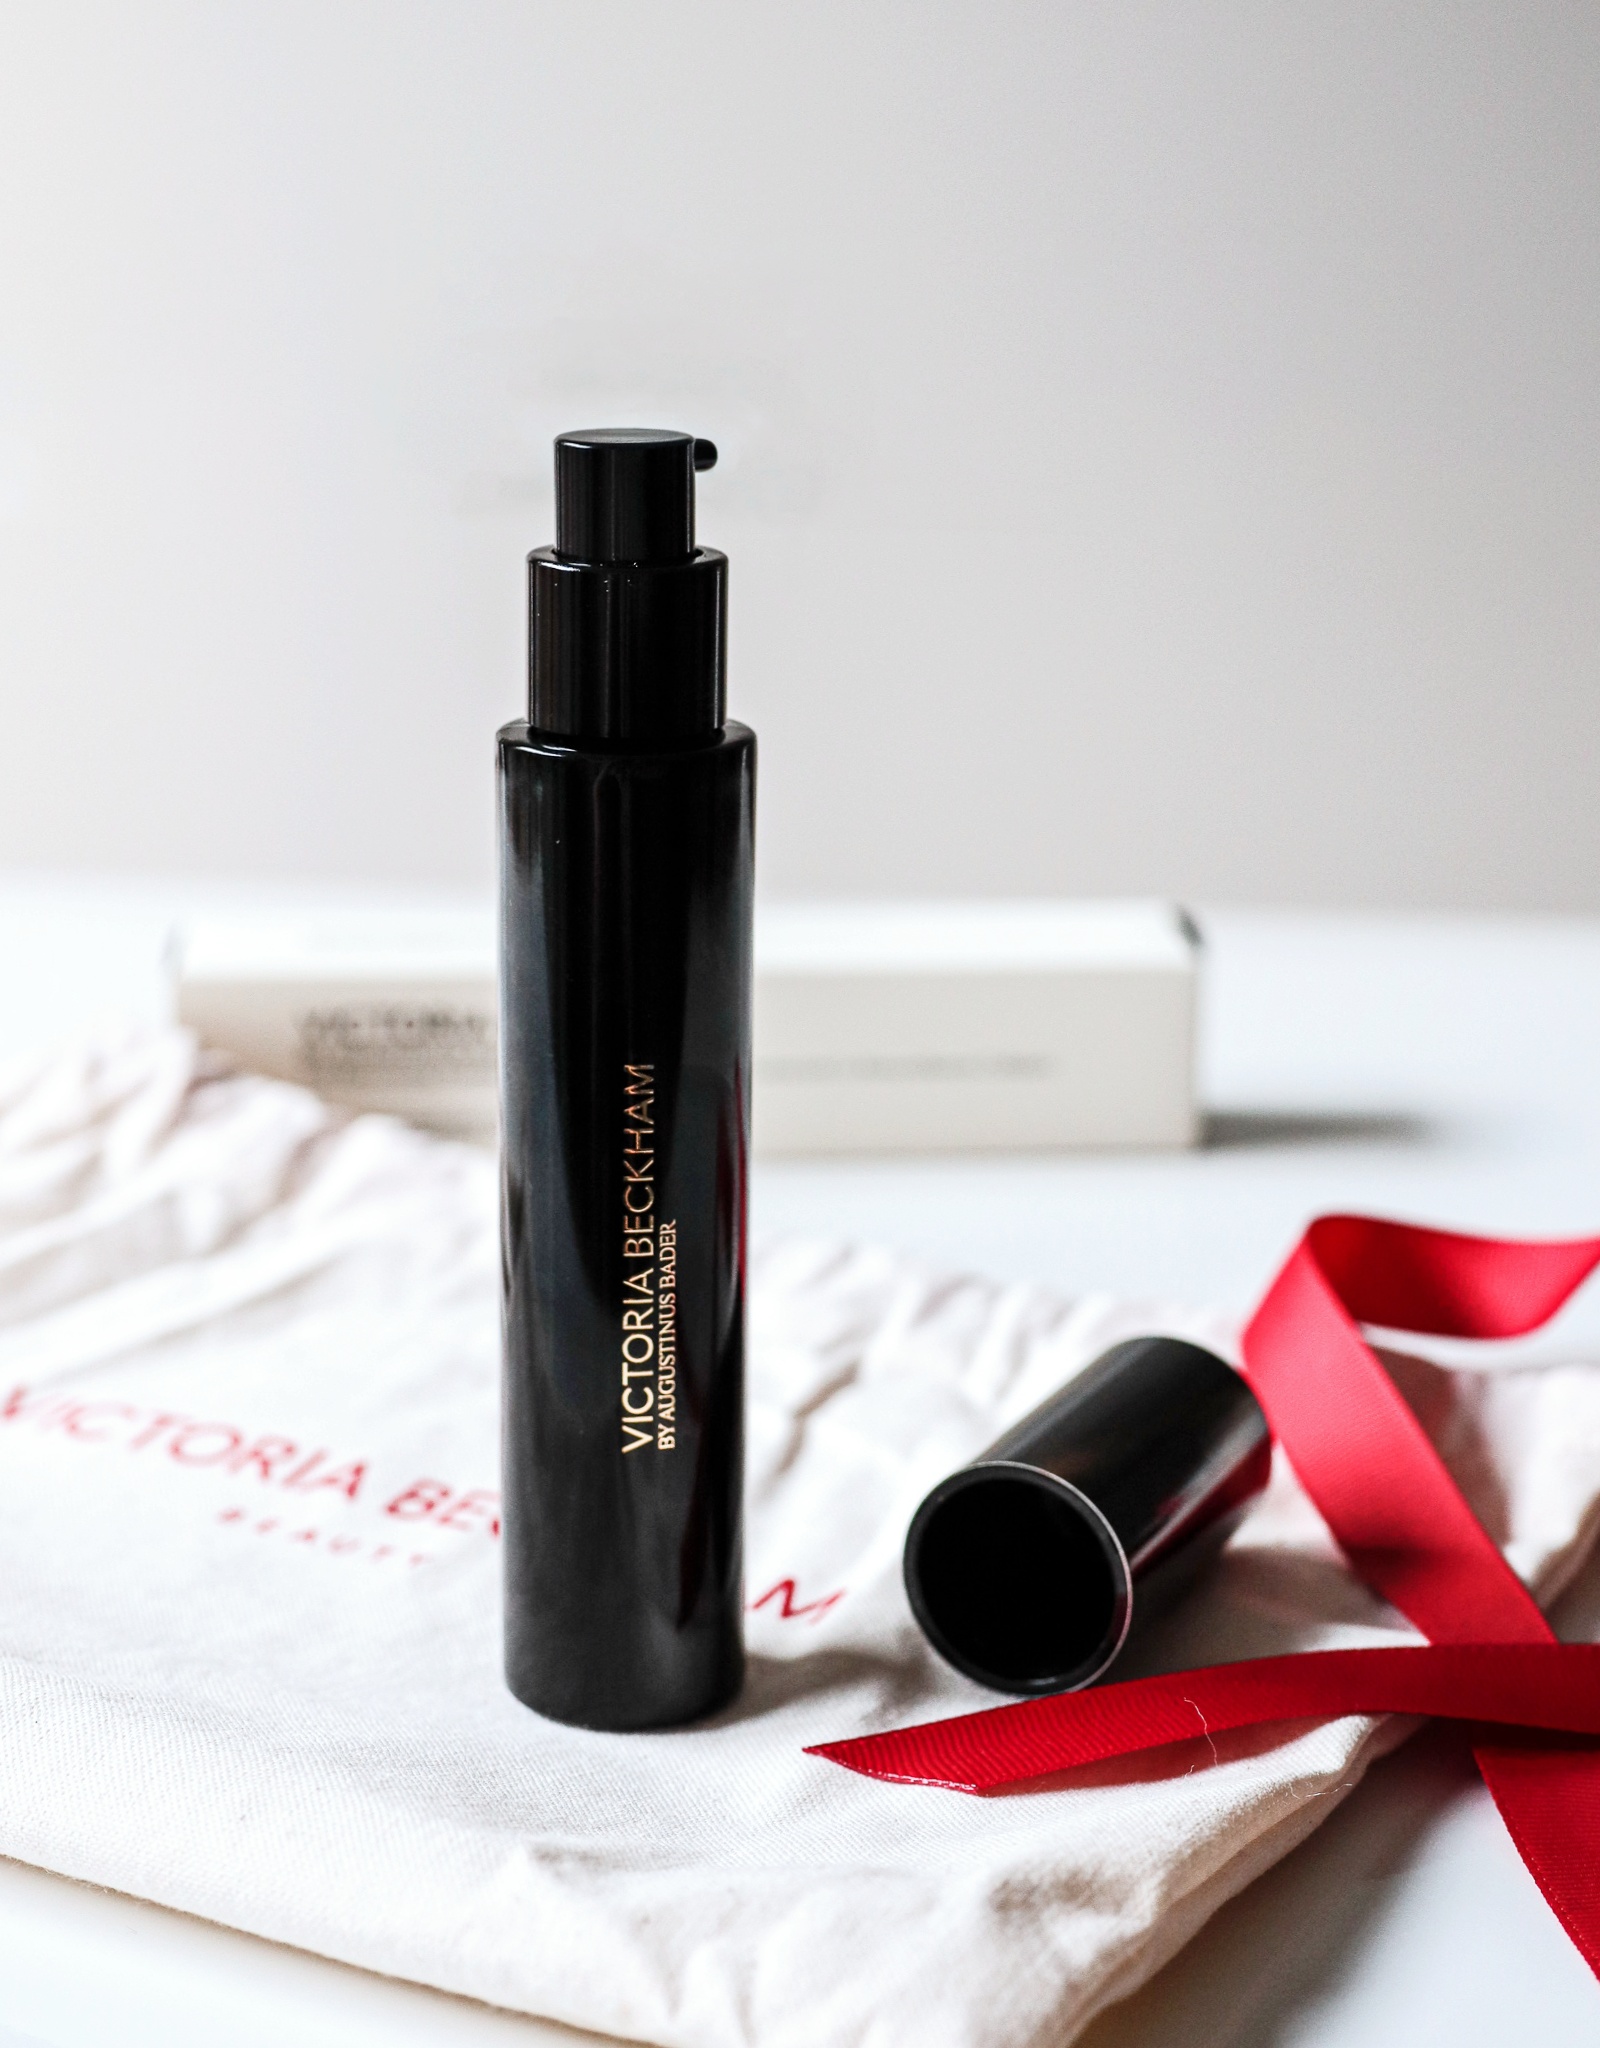 Victoria Beckham Cell Rejuvenating Priming Moisturizer Review - The LDN Diaries